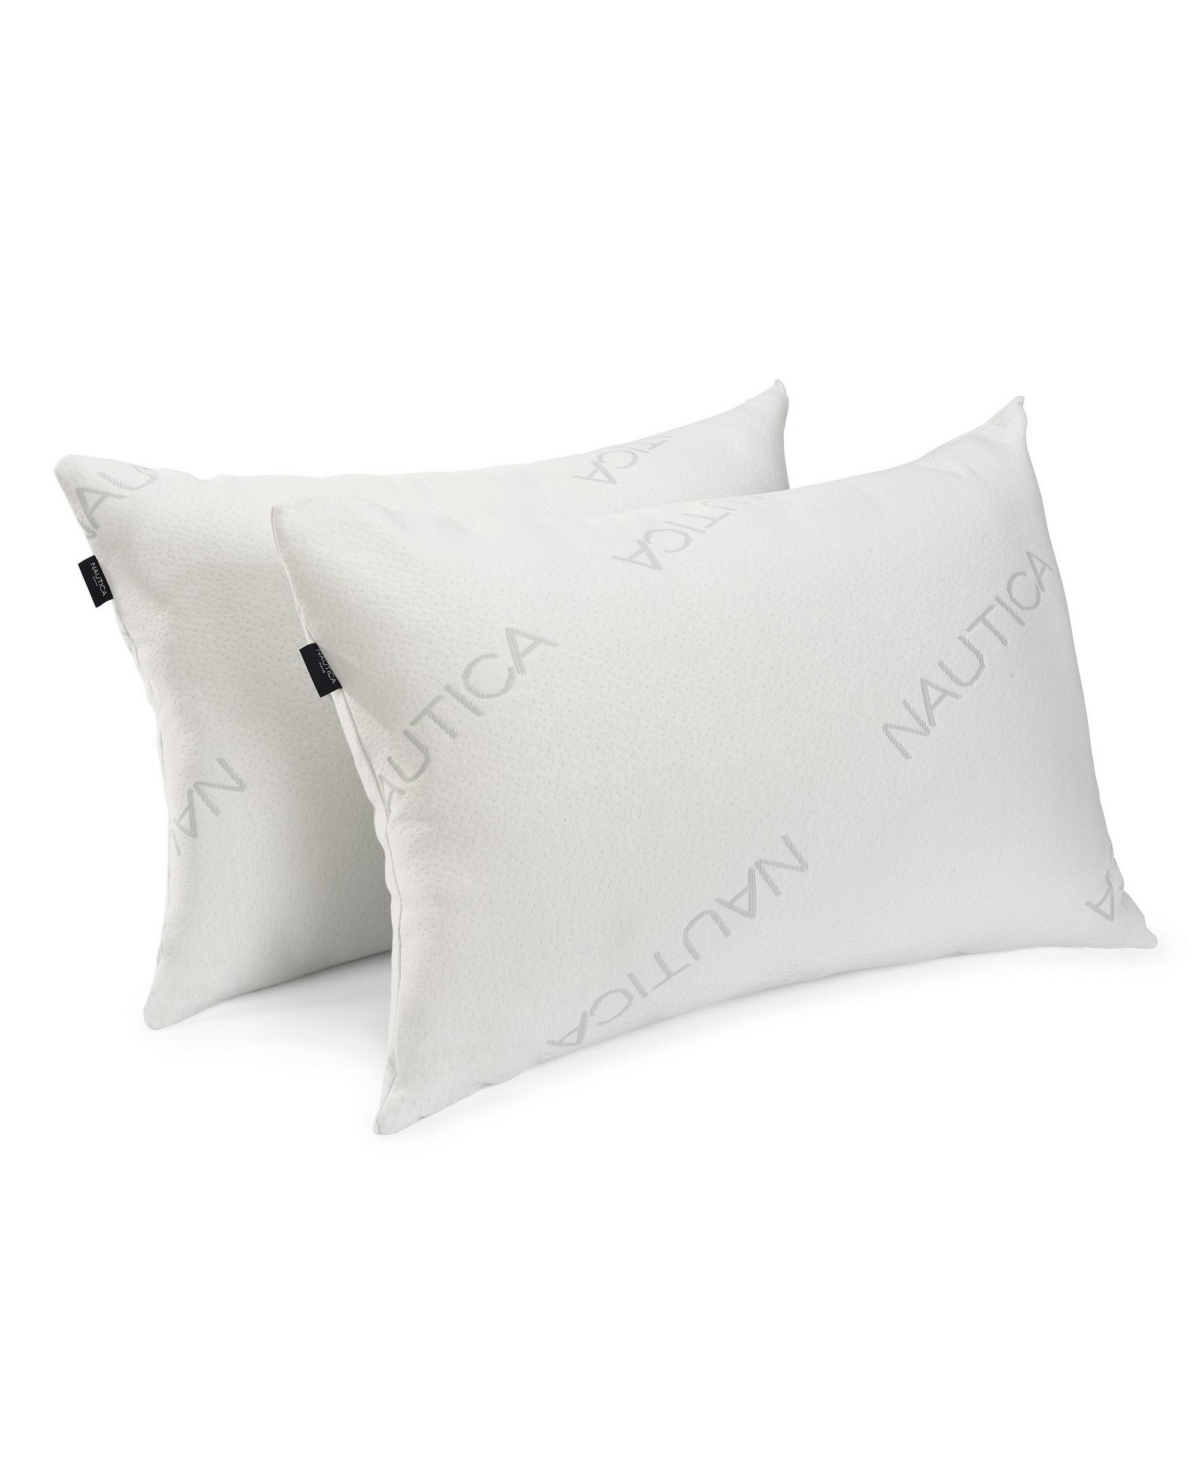 Nautica Home Luxury Knit 2 Pack Pillows, King In White